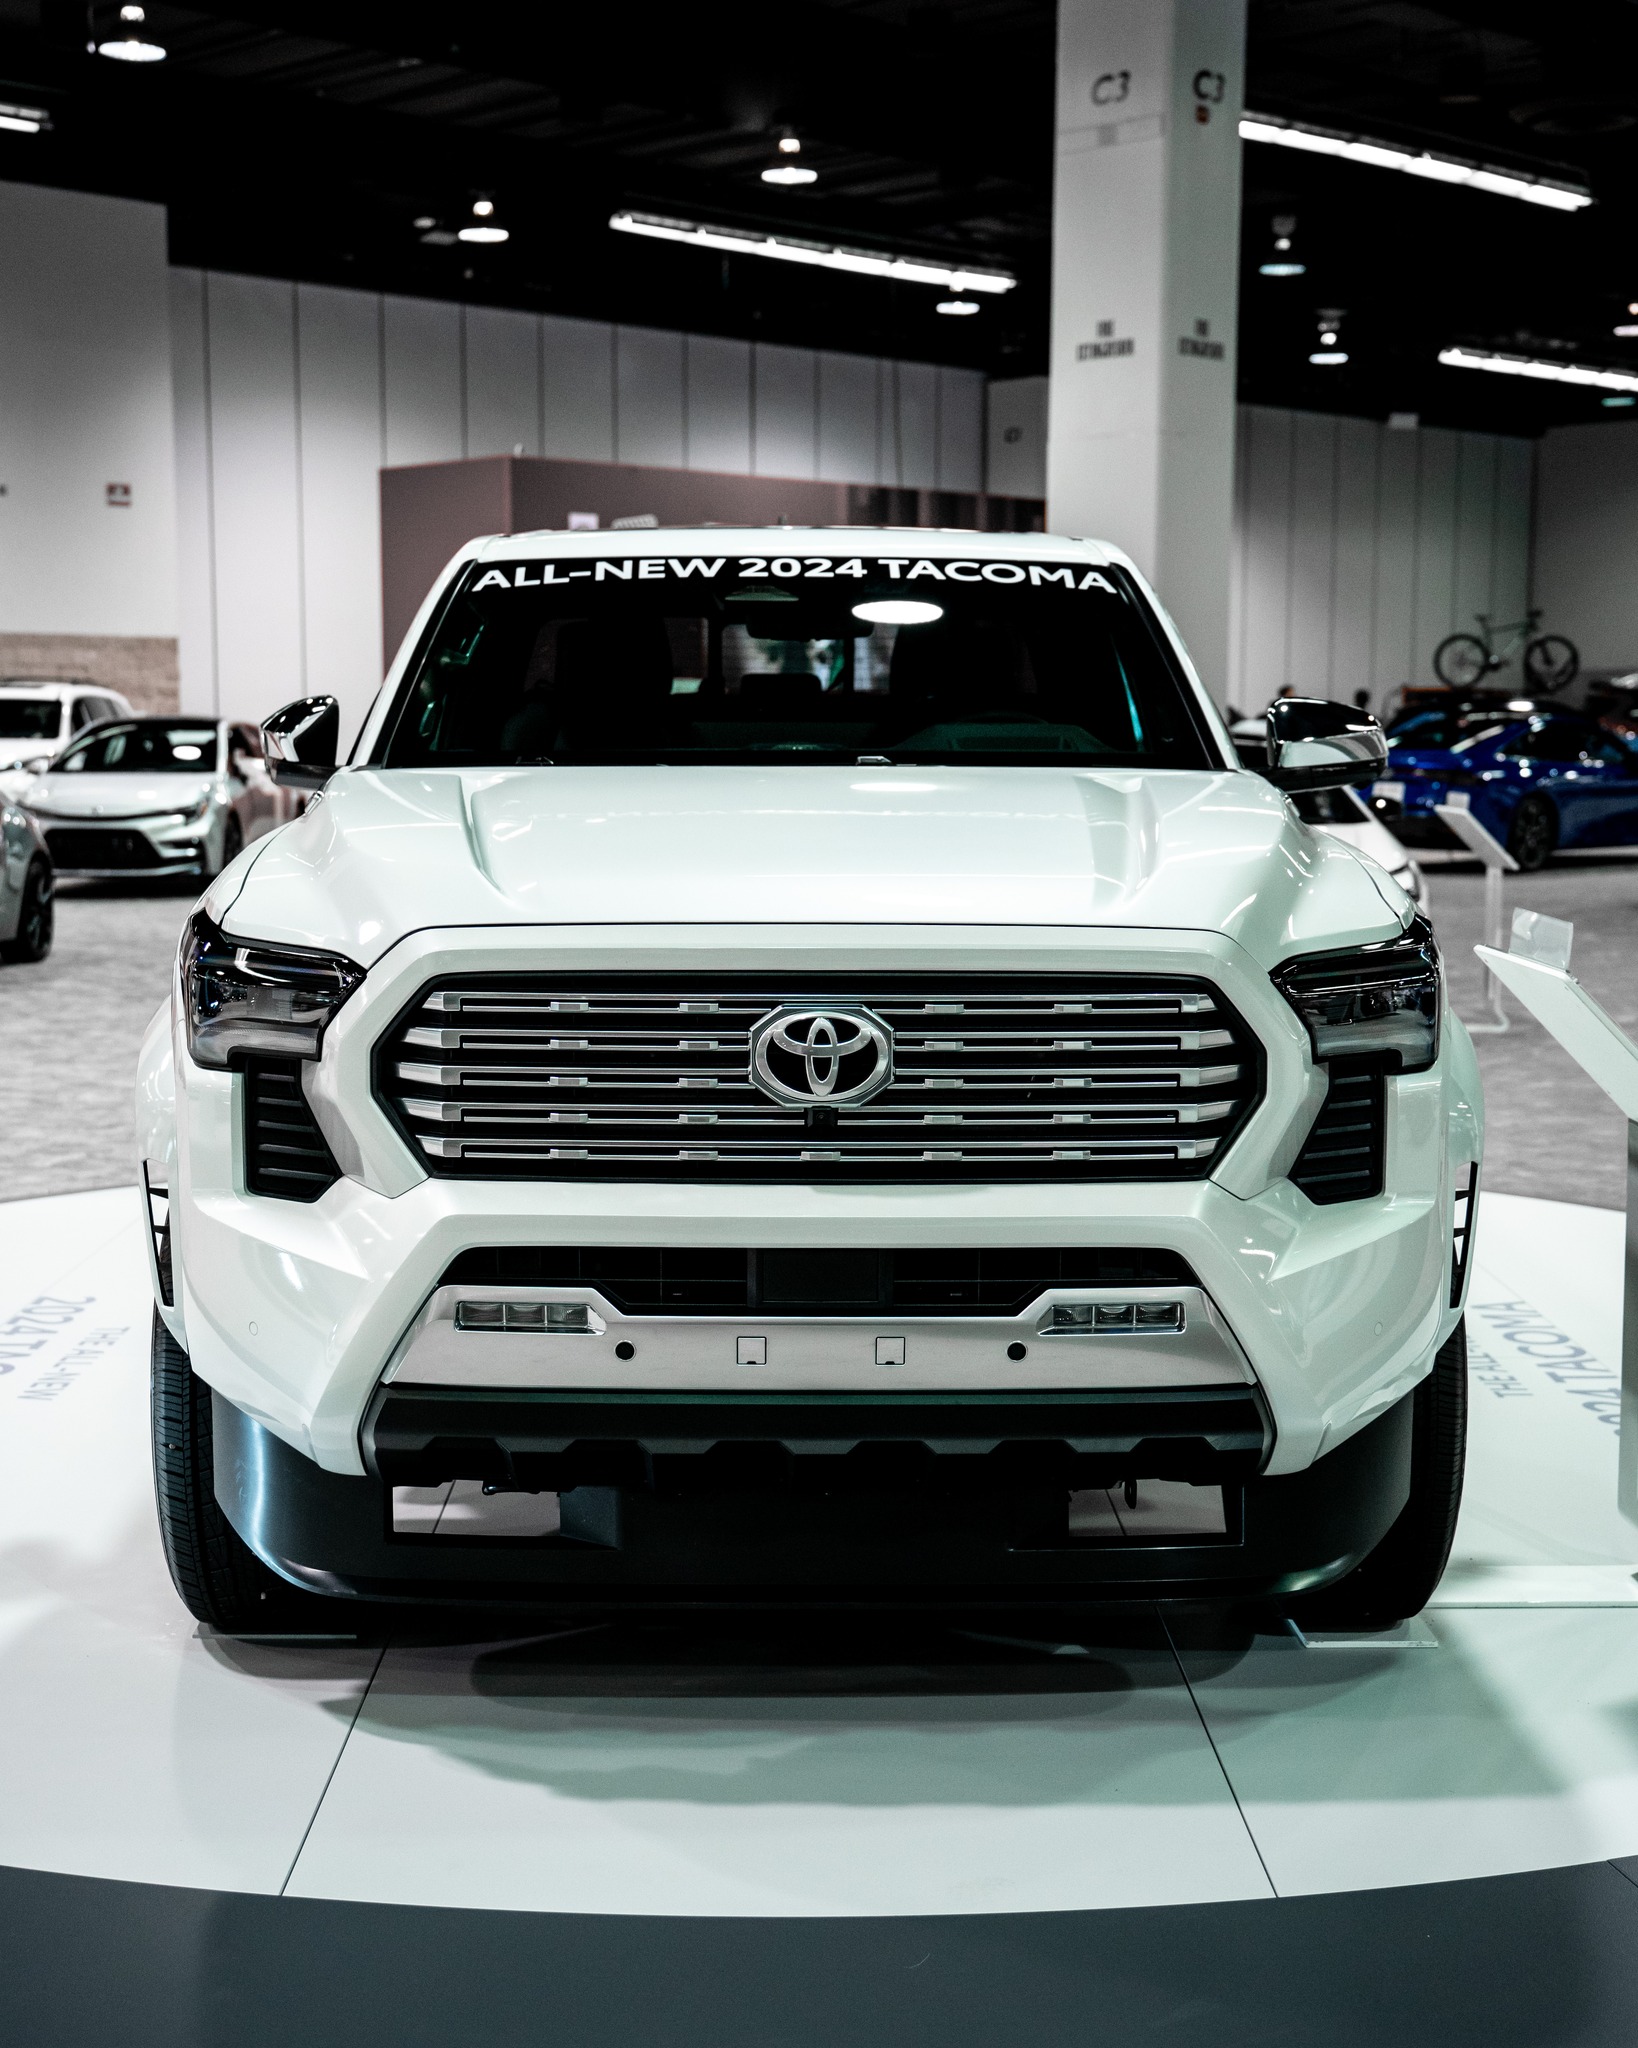 2024 Tacoma 2024 Tacoma Limited Specs, Price, MPG, Options/Packages, Features, Photos & Videos white-windchill-pearl-2024-tacoma-limited-4-